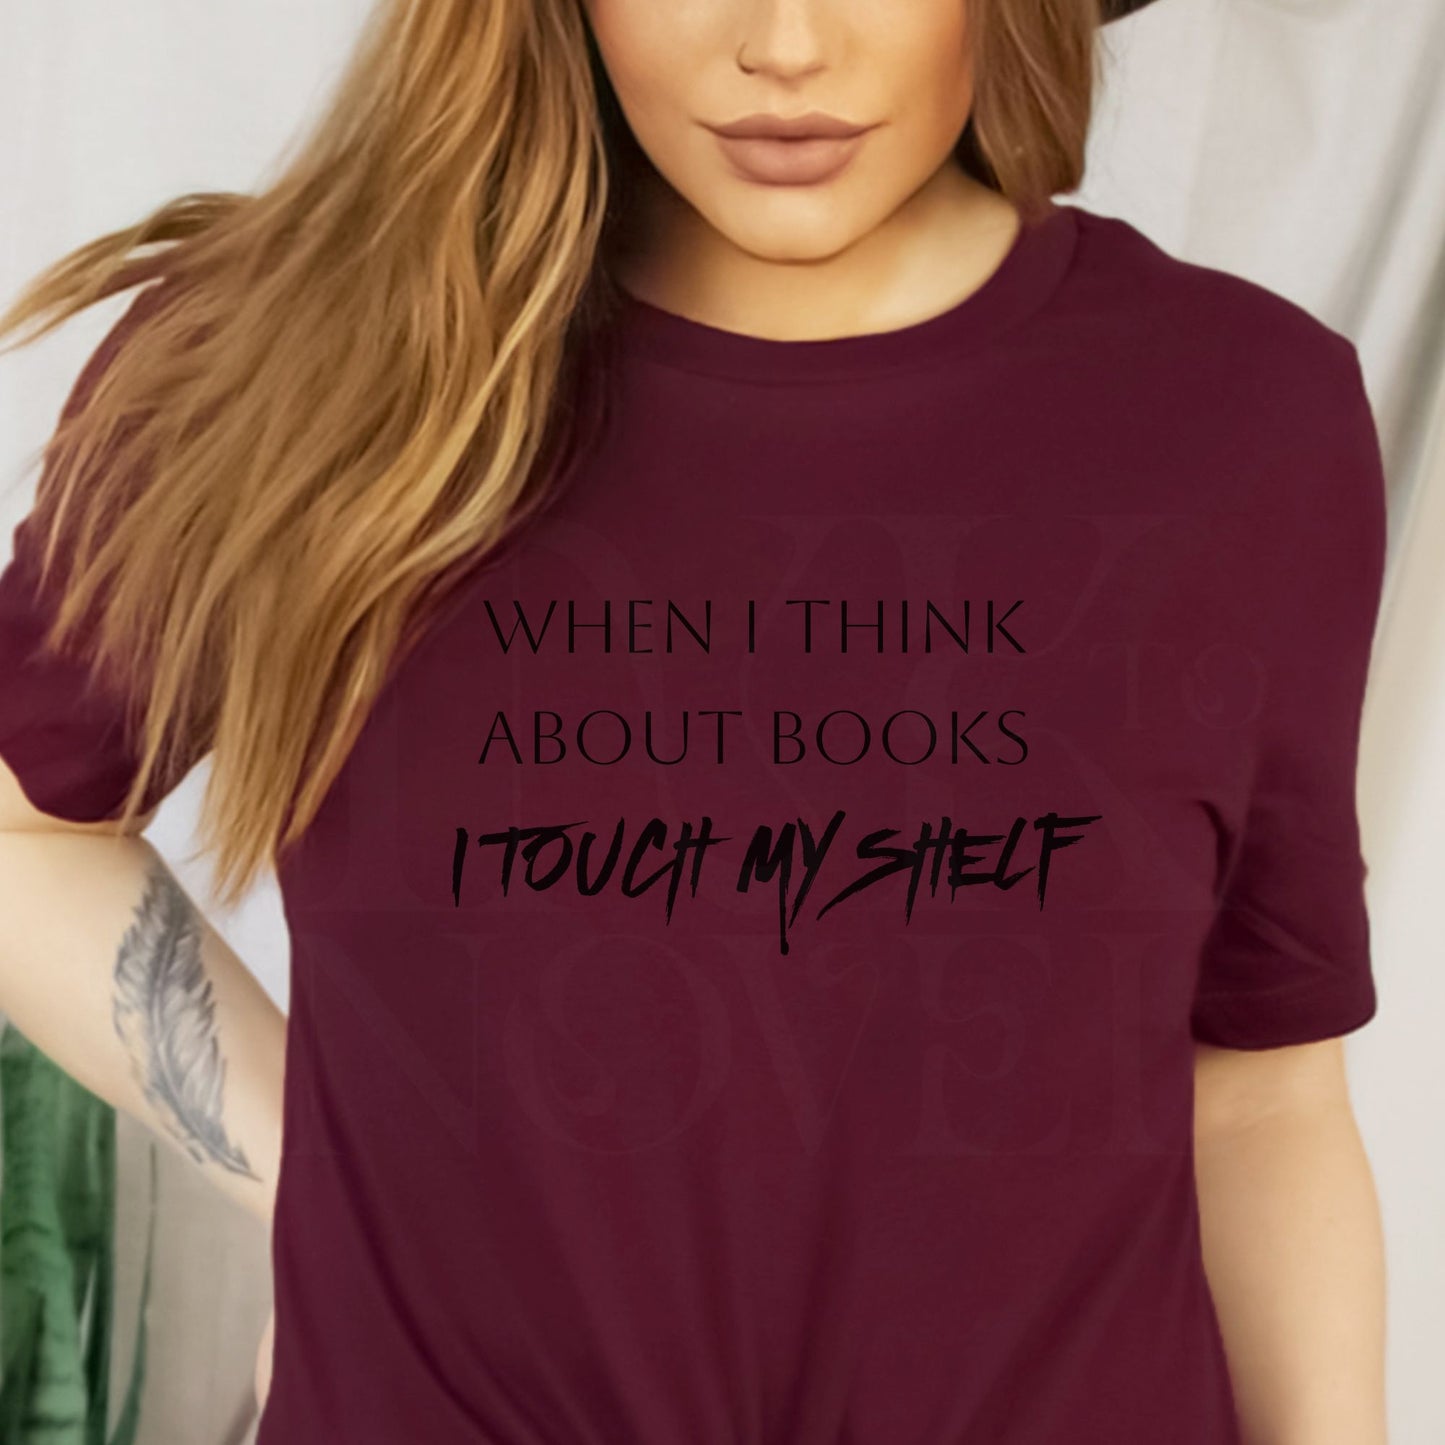 When I Think About Books, I Touch My Shelf T-Shirt